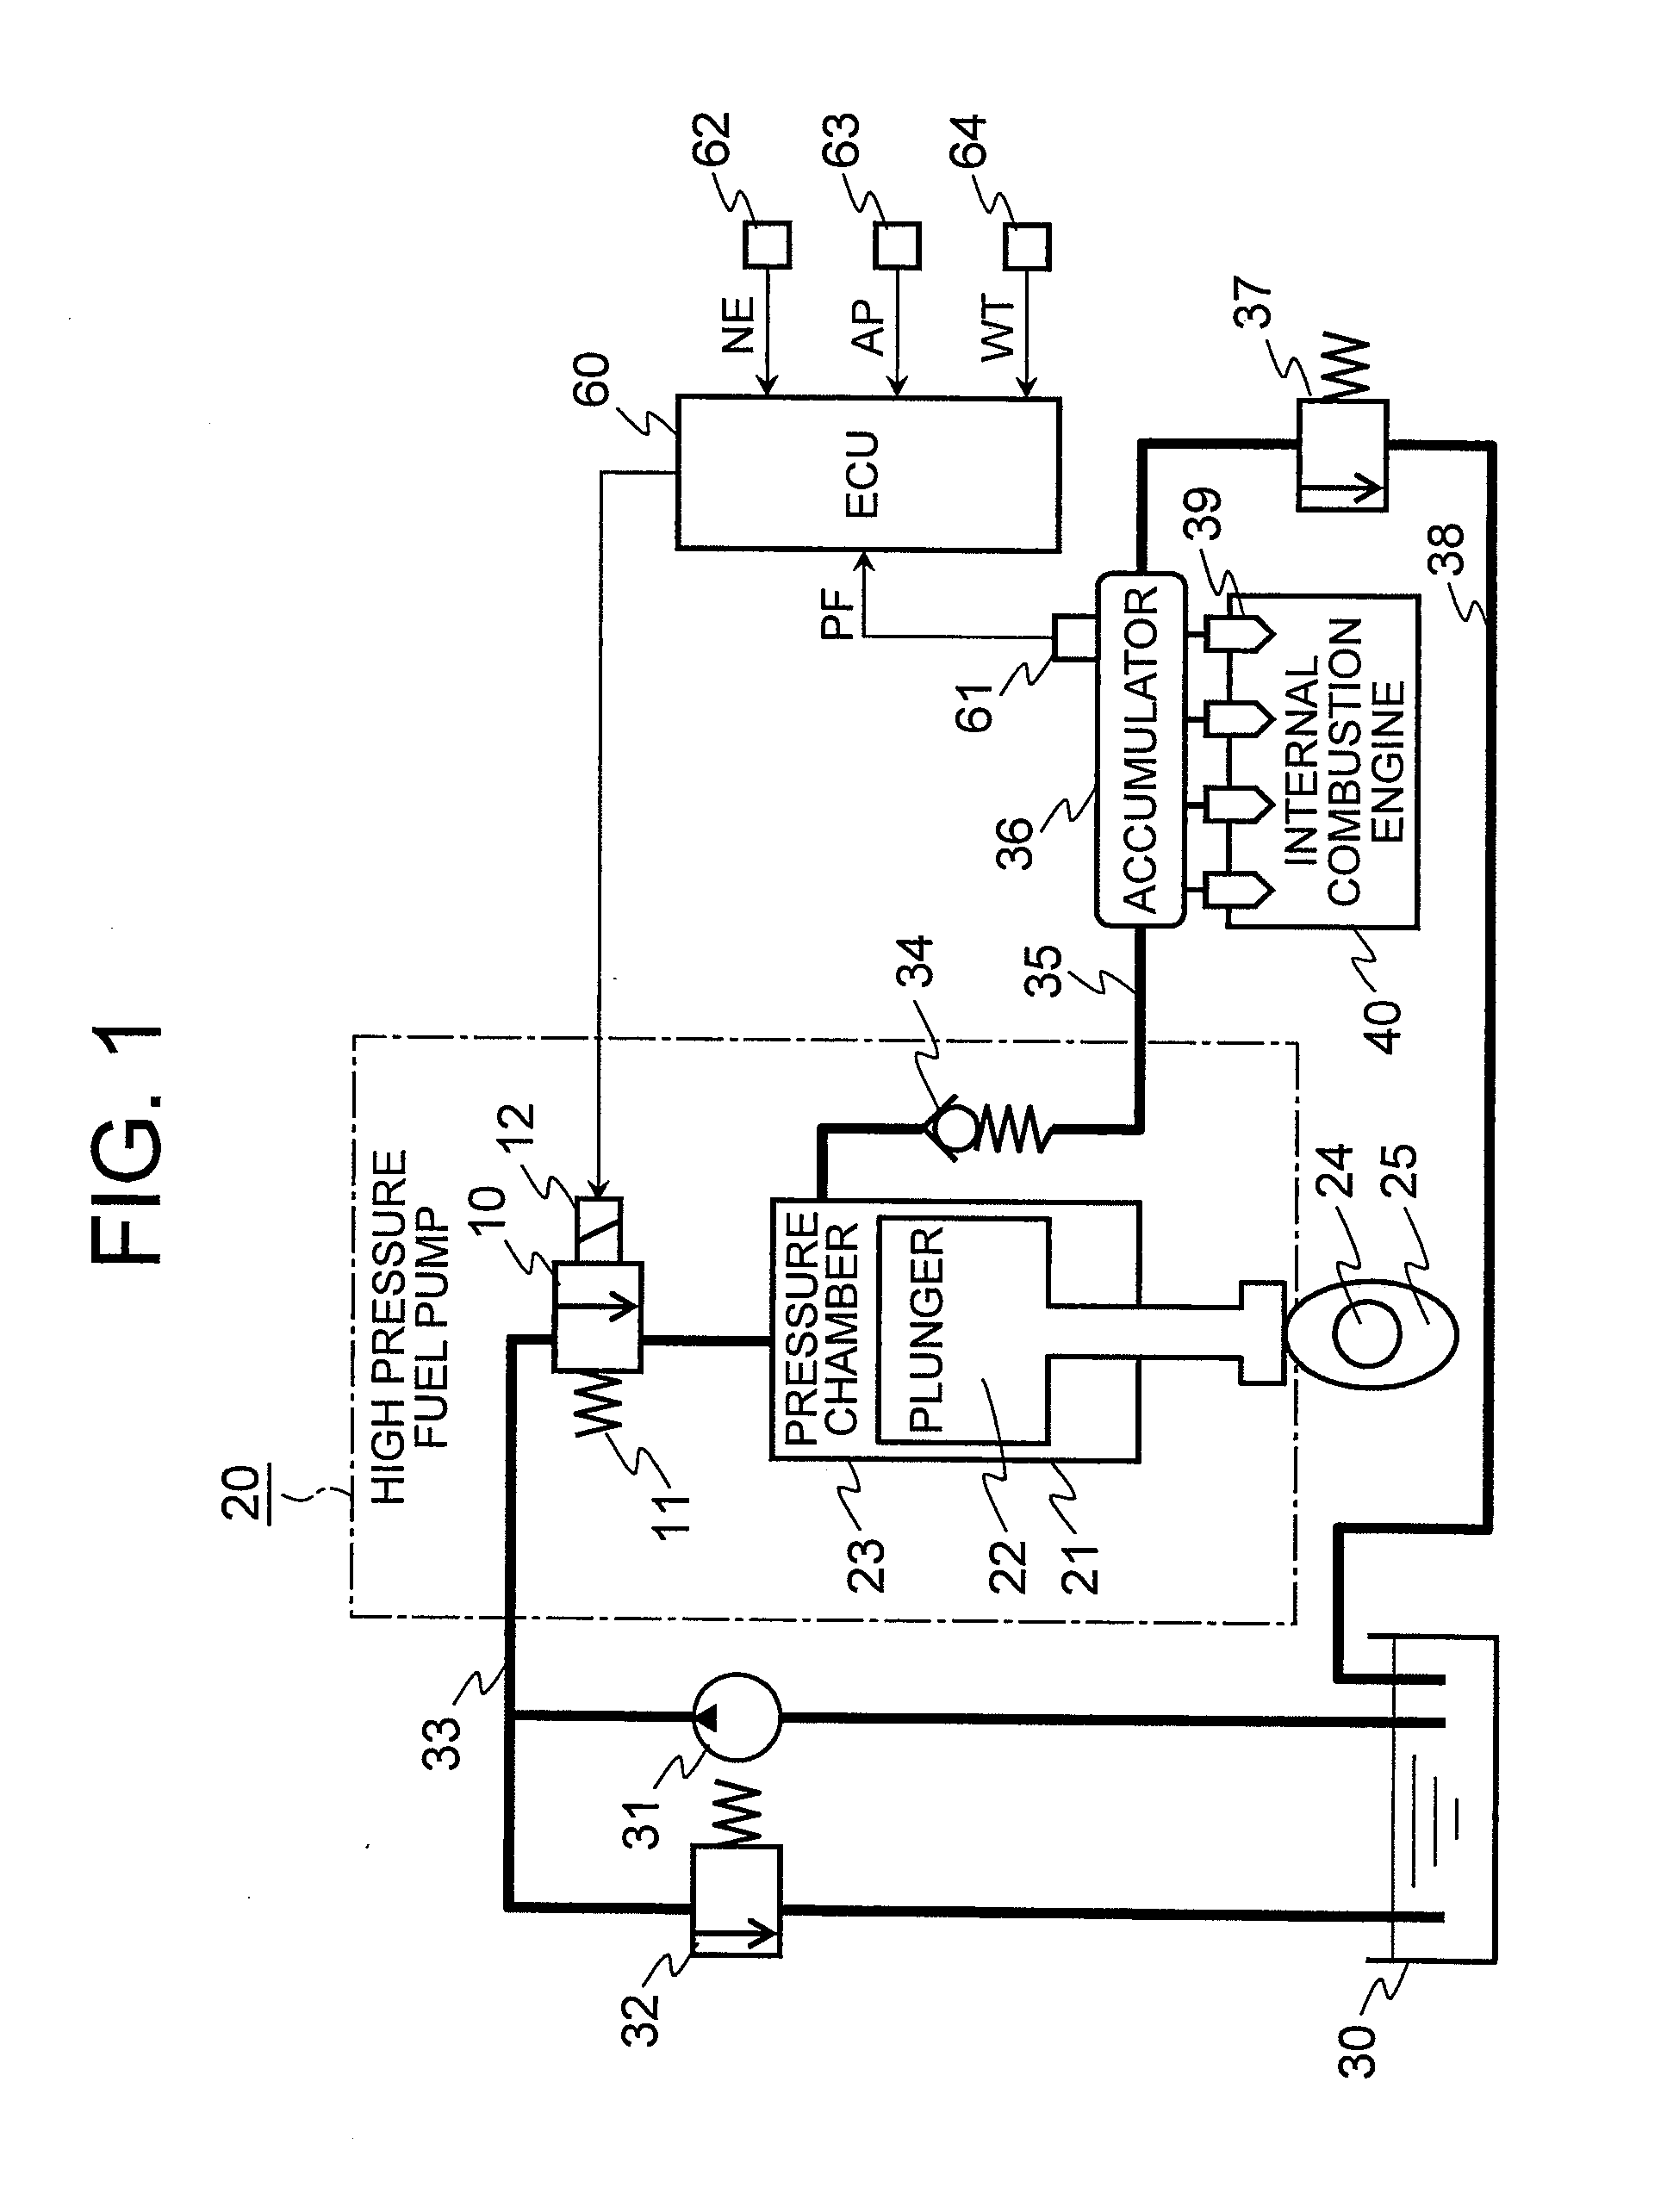 High pressure fuel pump control apparatus for an internal combustion engine